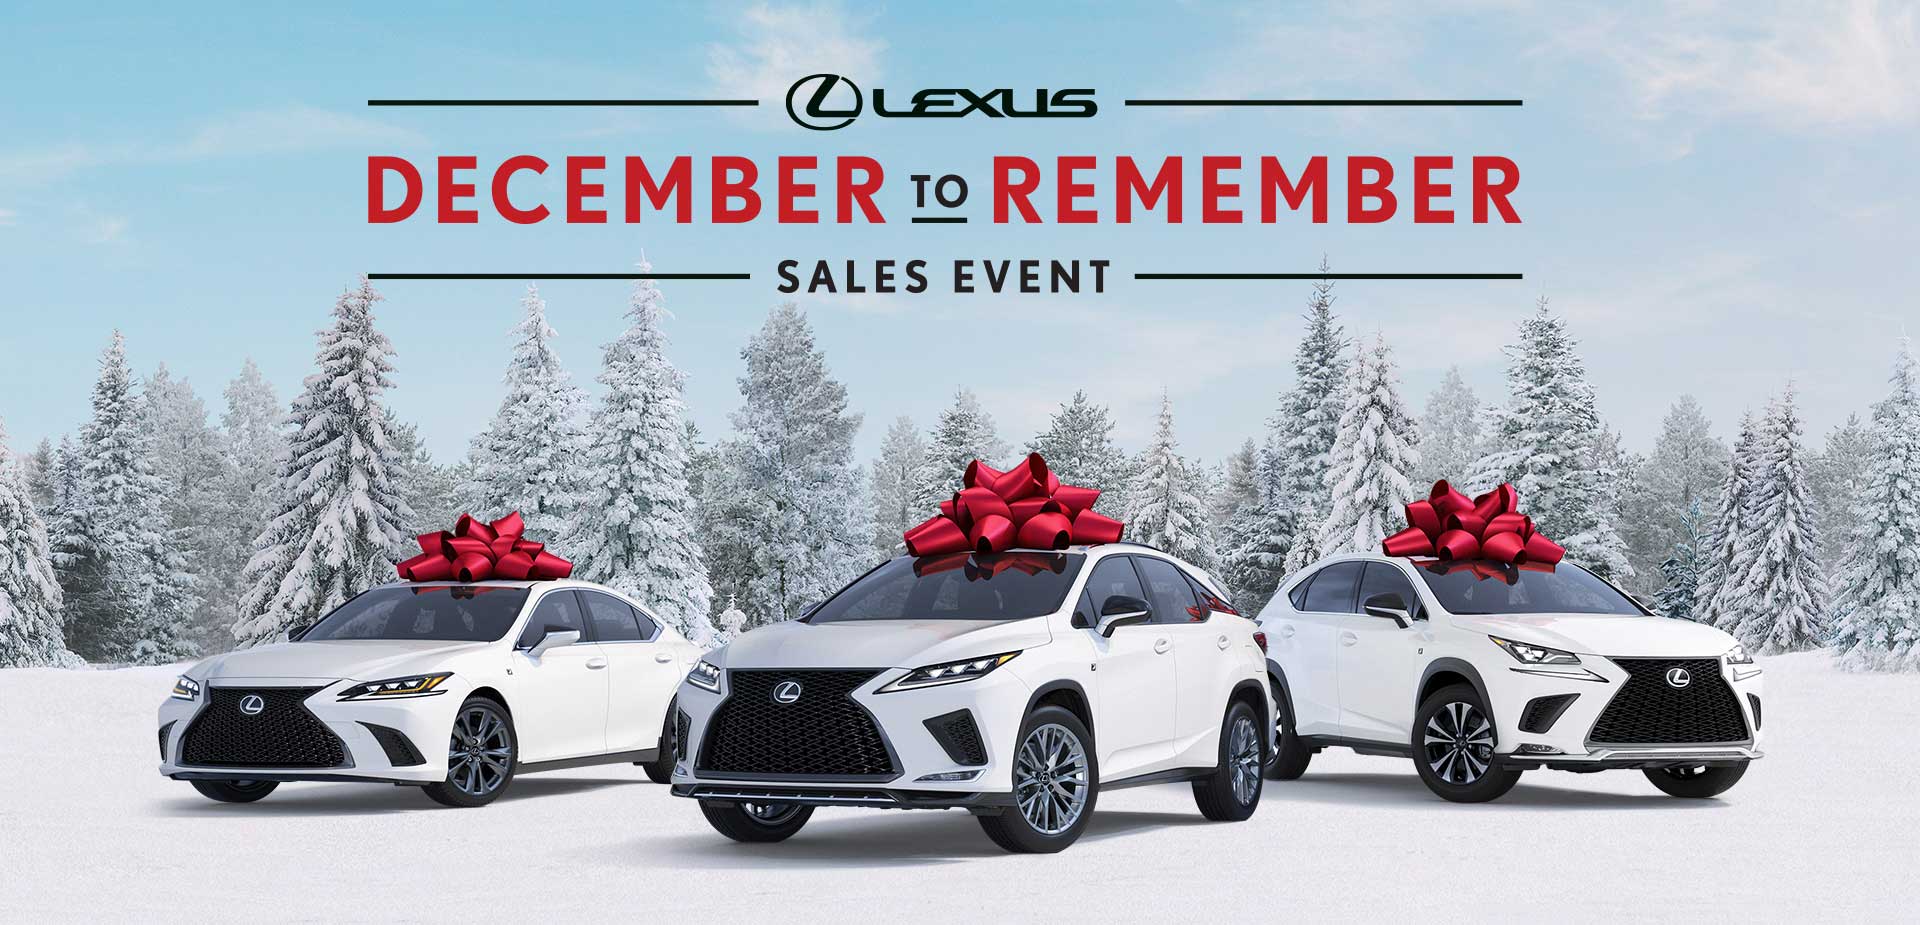 Make it a December to Remember at Hennessy Lexus